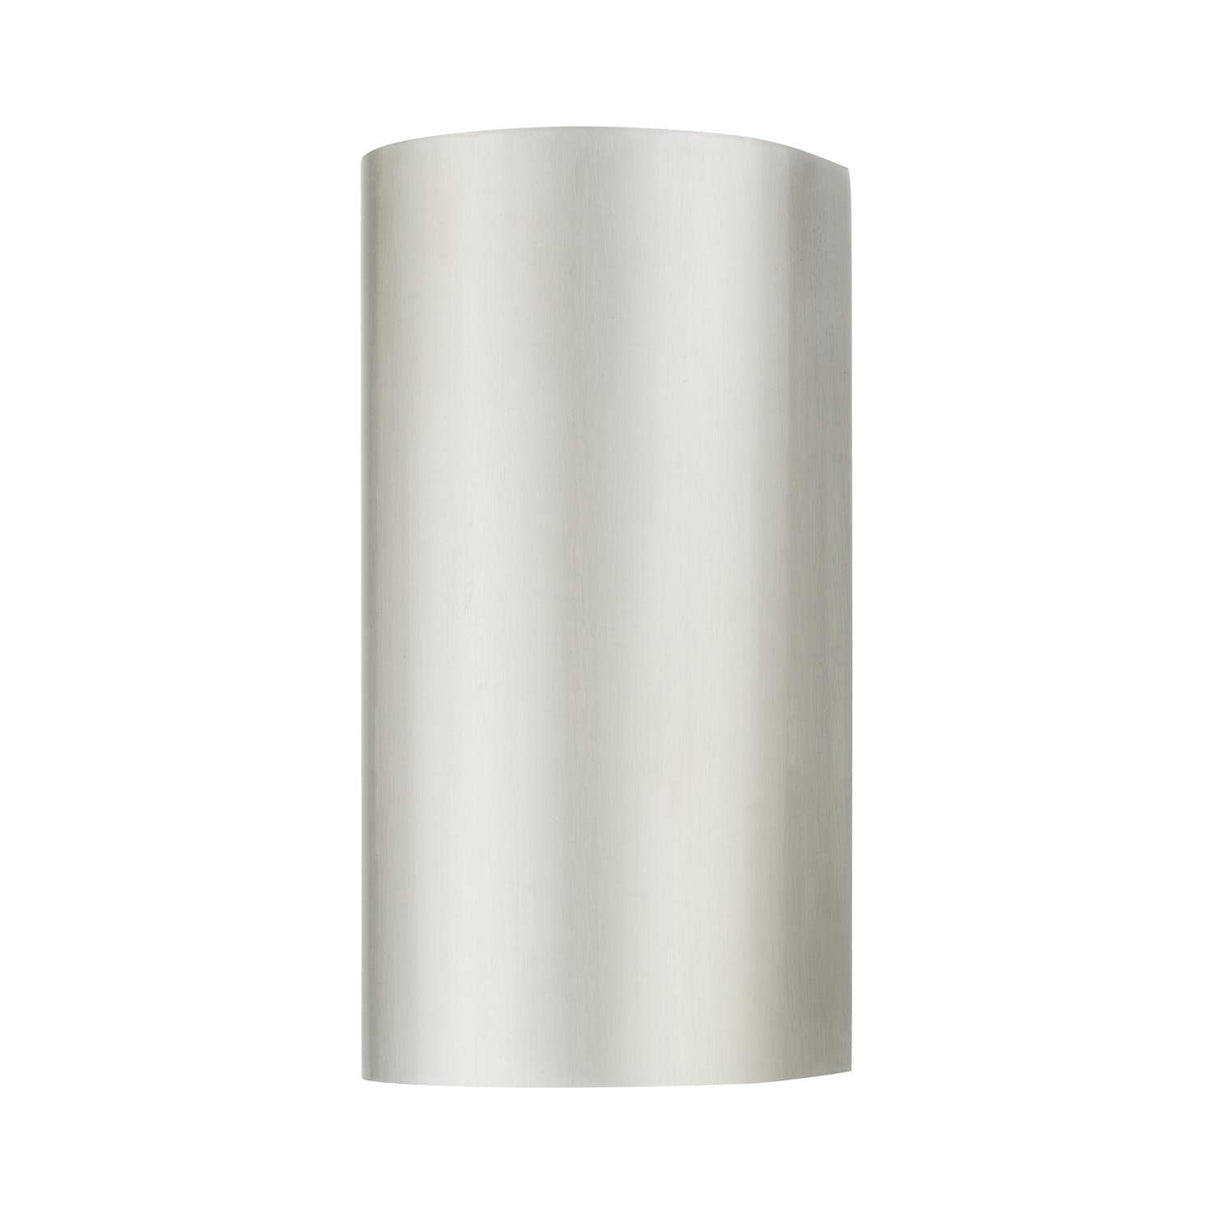 Livex Lighting 22062-91 Bond - 1 Light Medium Outdoor ADA Wall Sconce in Urban Style-10 Inches Tall and 5 Inches Wide, Finish Color: Brushed Nickel